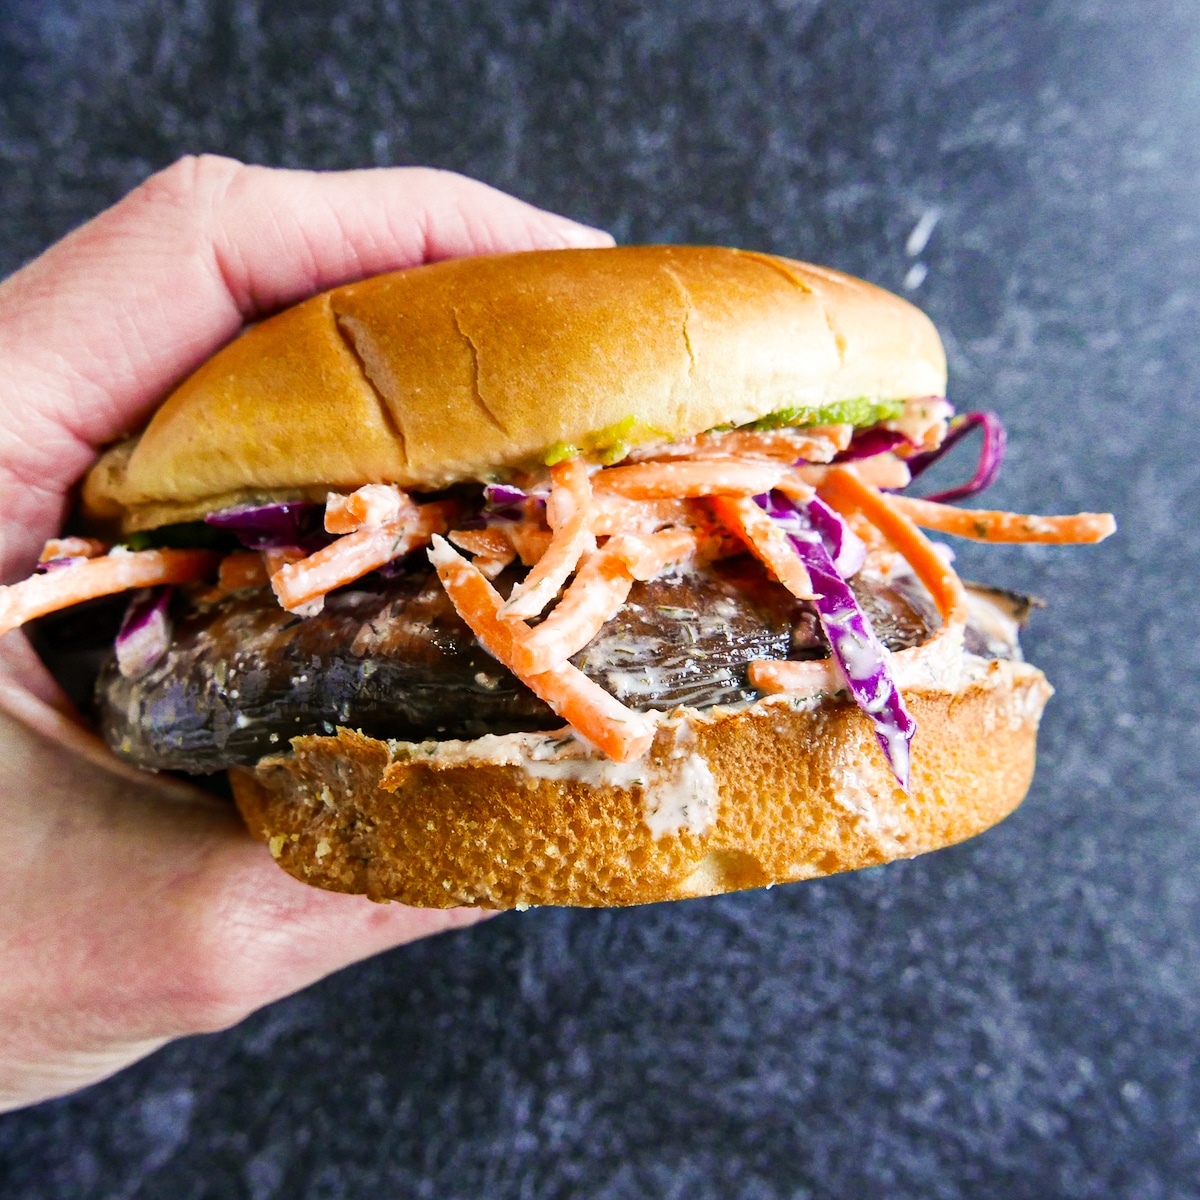 White hand holding up mushroom sandwich topped with slaw.